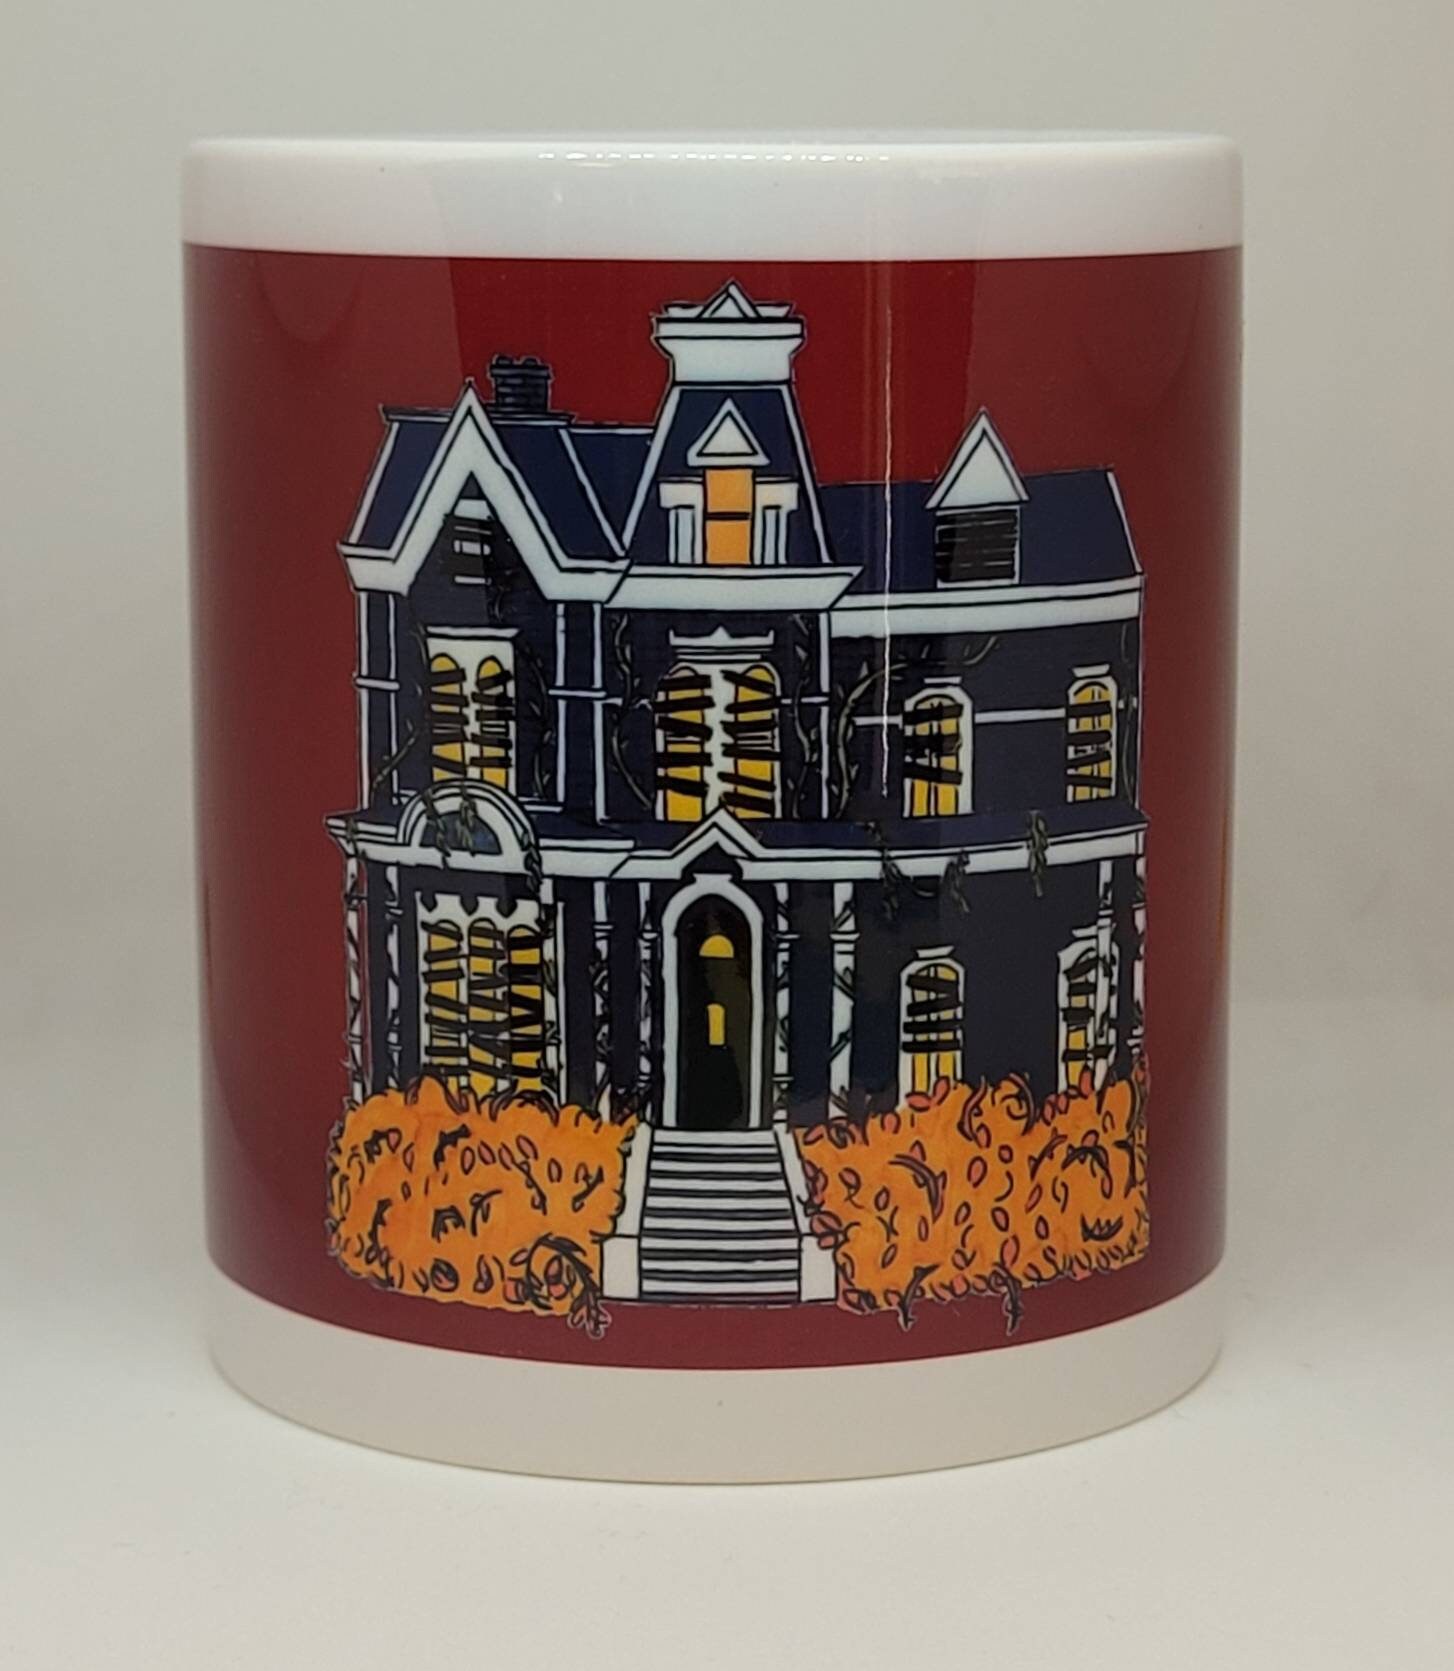 Waffle House Coffee Mug 8 Full Oz Cup Diner Style Rounded Up Lip By Tuxton